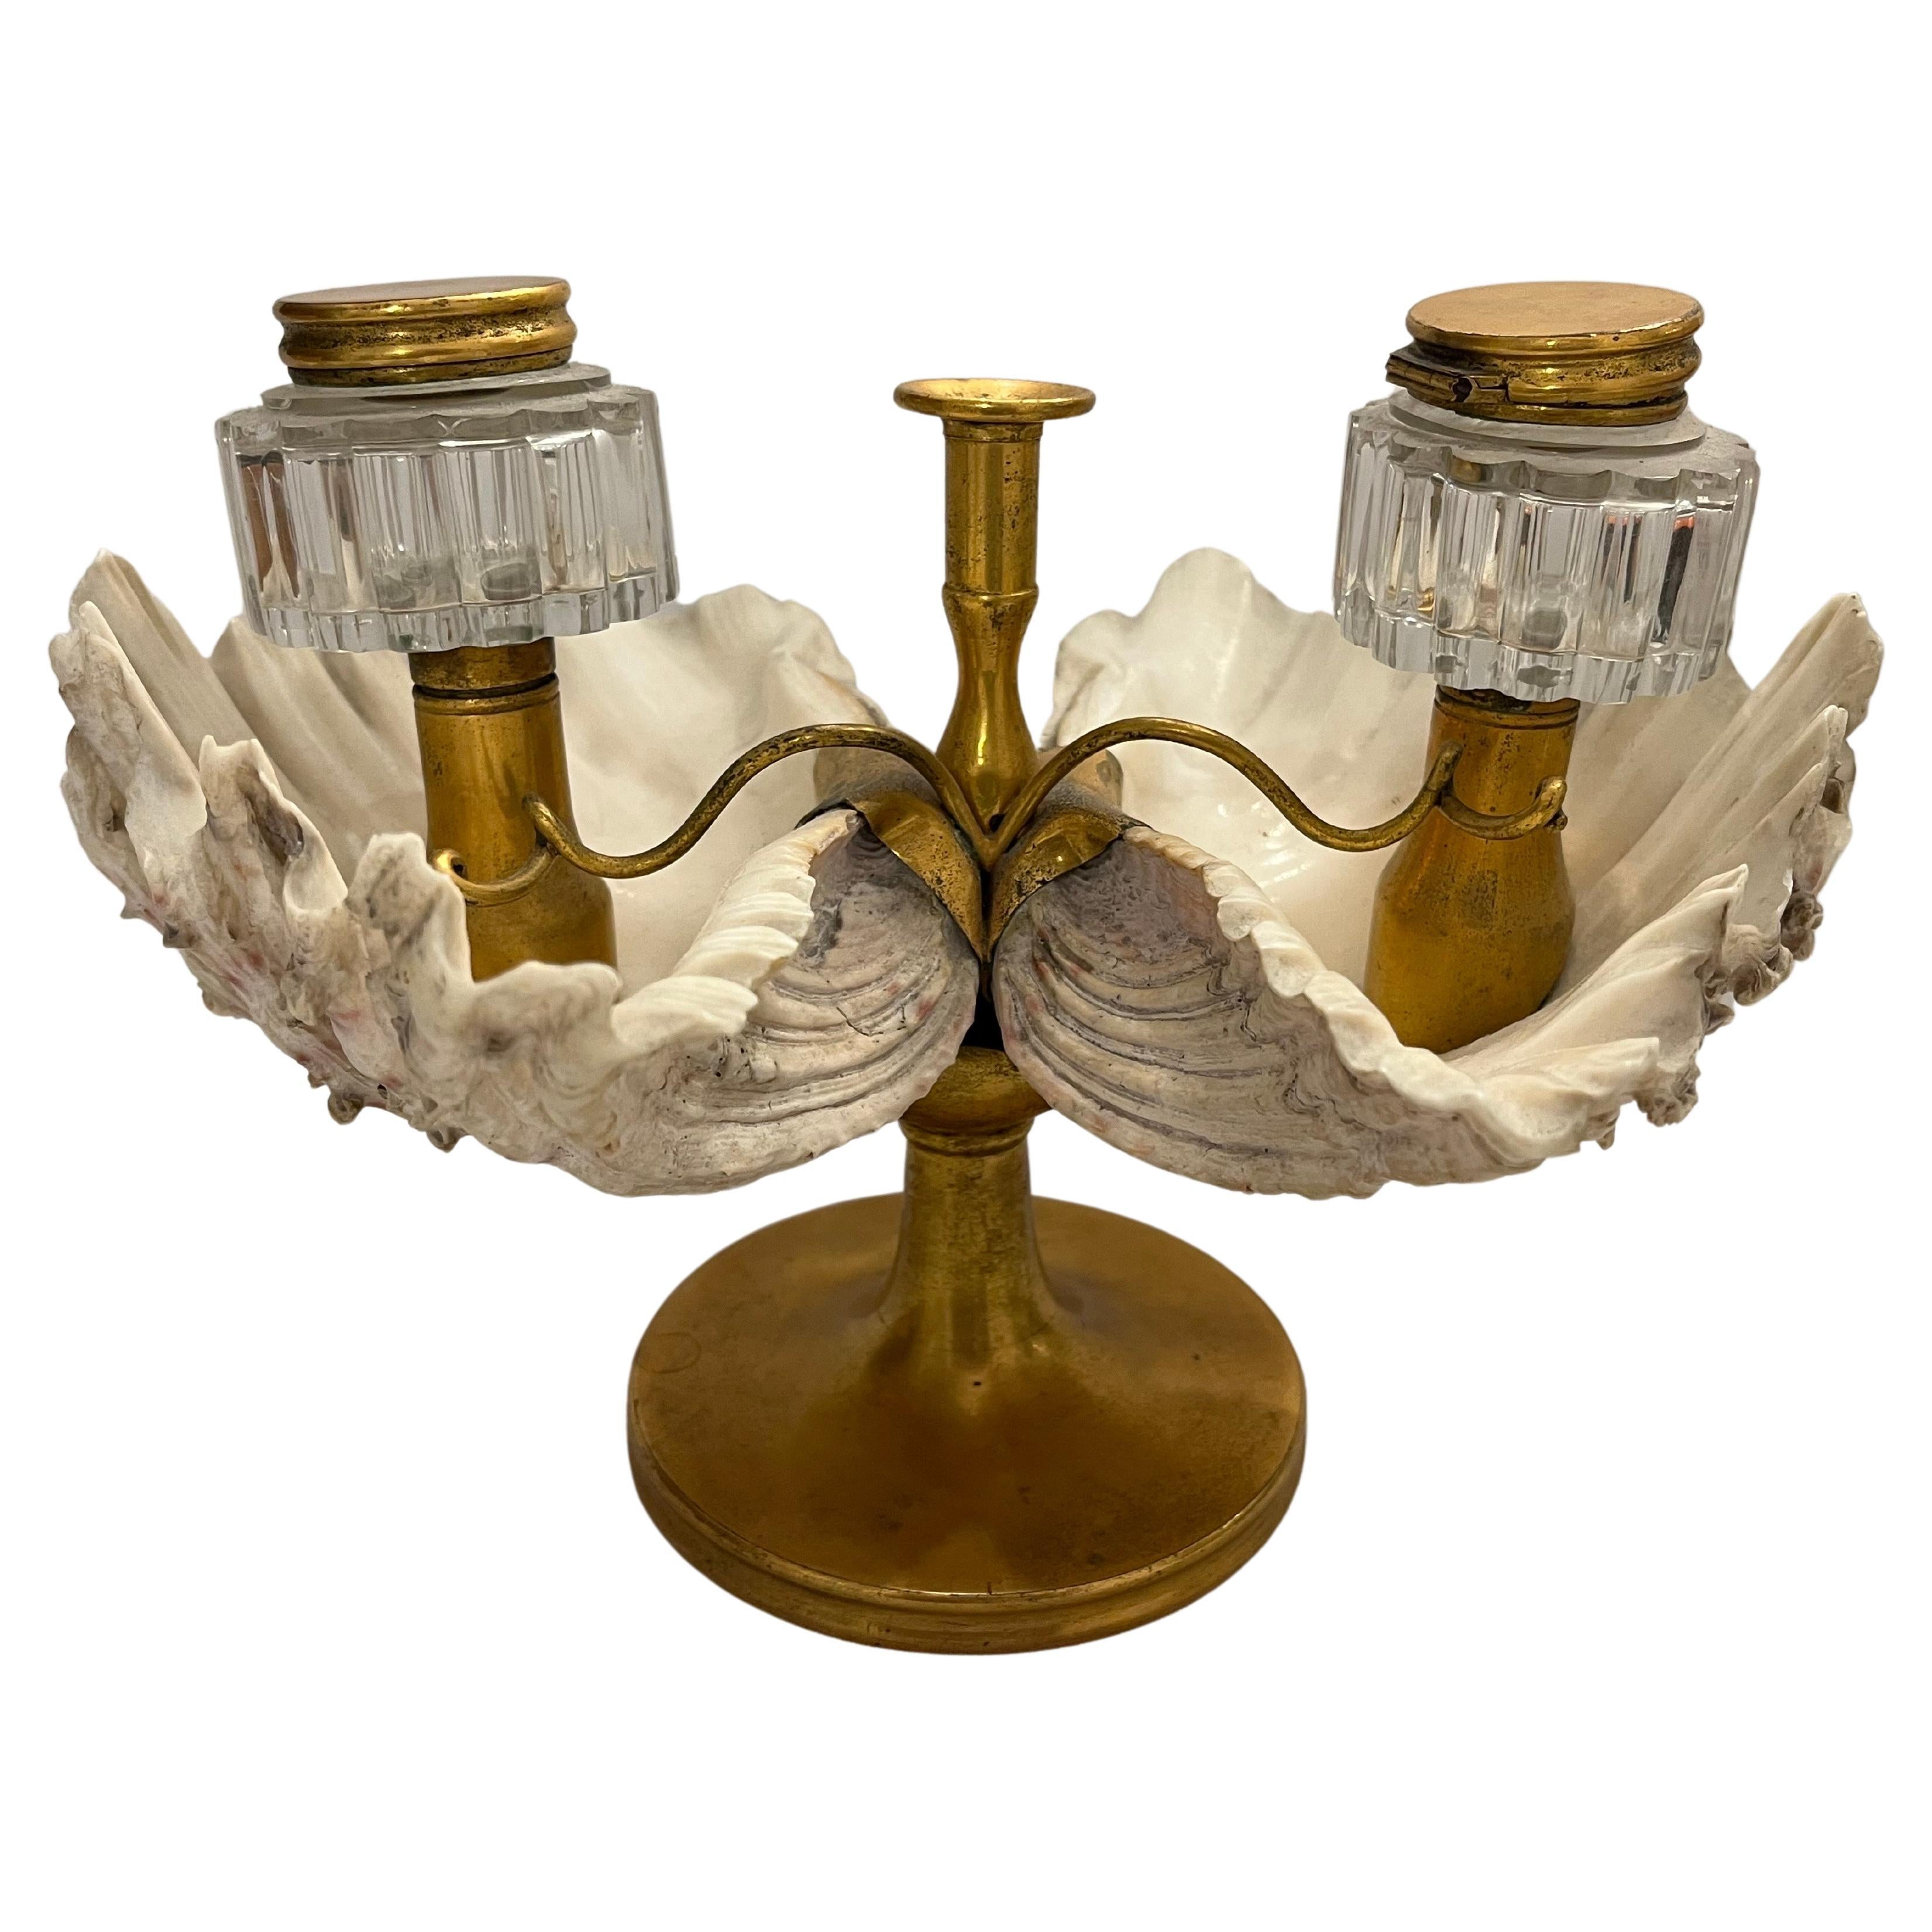 An antique, early to mid 19th Century, William IV style and period double inkwell made of natural shells and gilt bronze. The double inkwell features two scalloped fluted glass containers complete with hinged lids, a scrolled arm pen rest and a